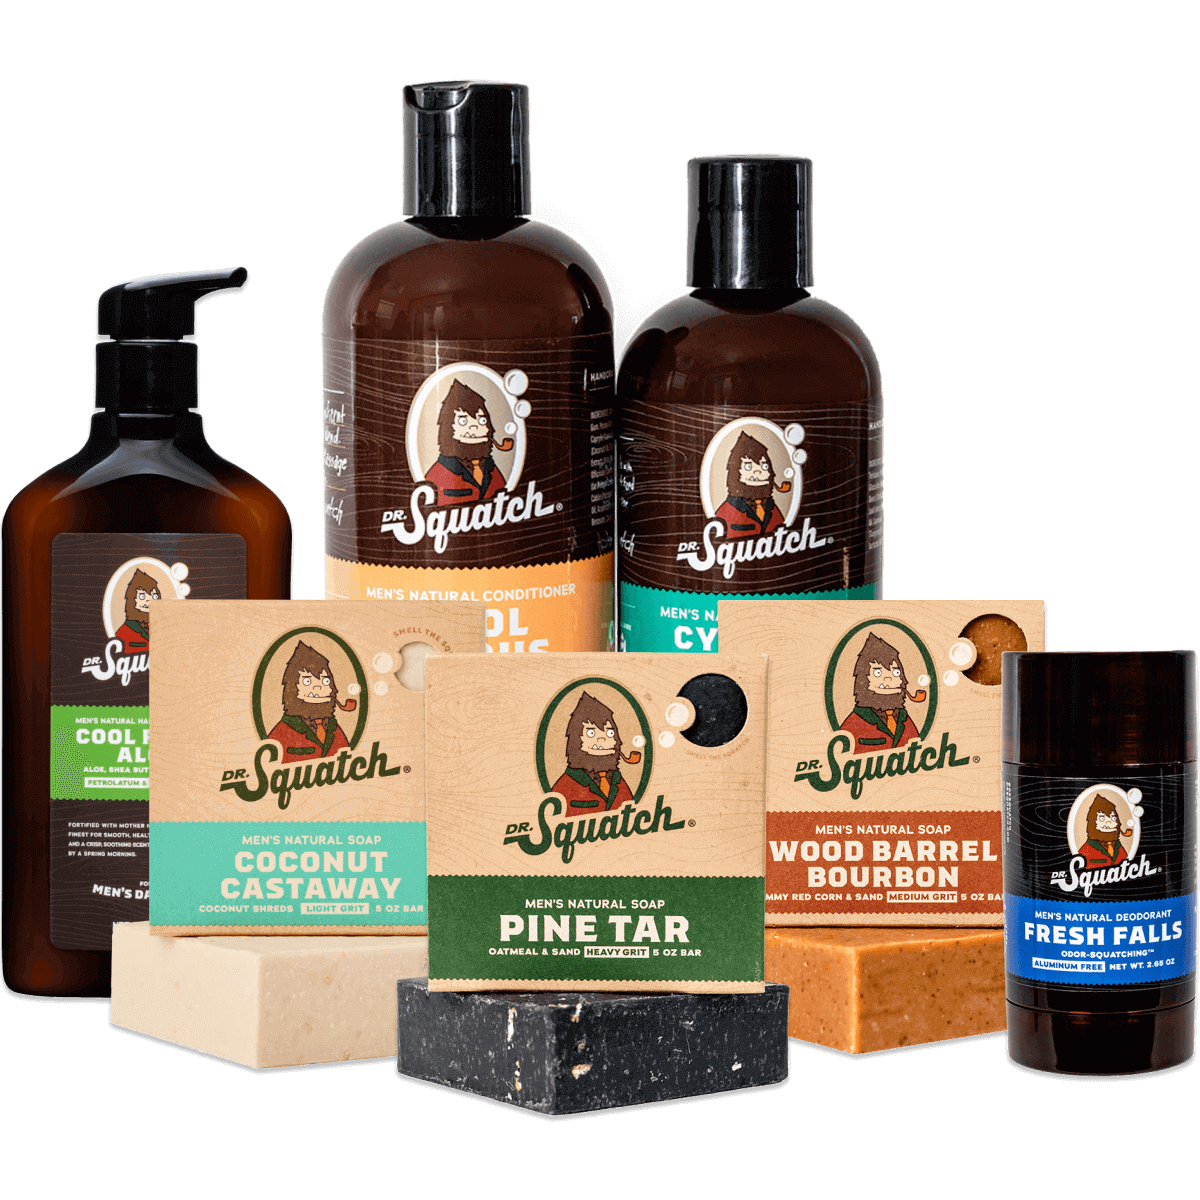 Dr. Squatch Lotion and Soap Pack - Moisturizing Lotion and 4 Bars